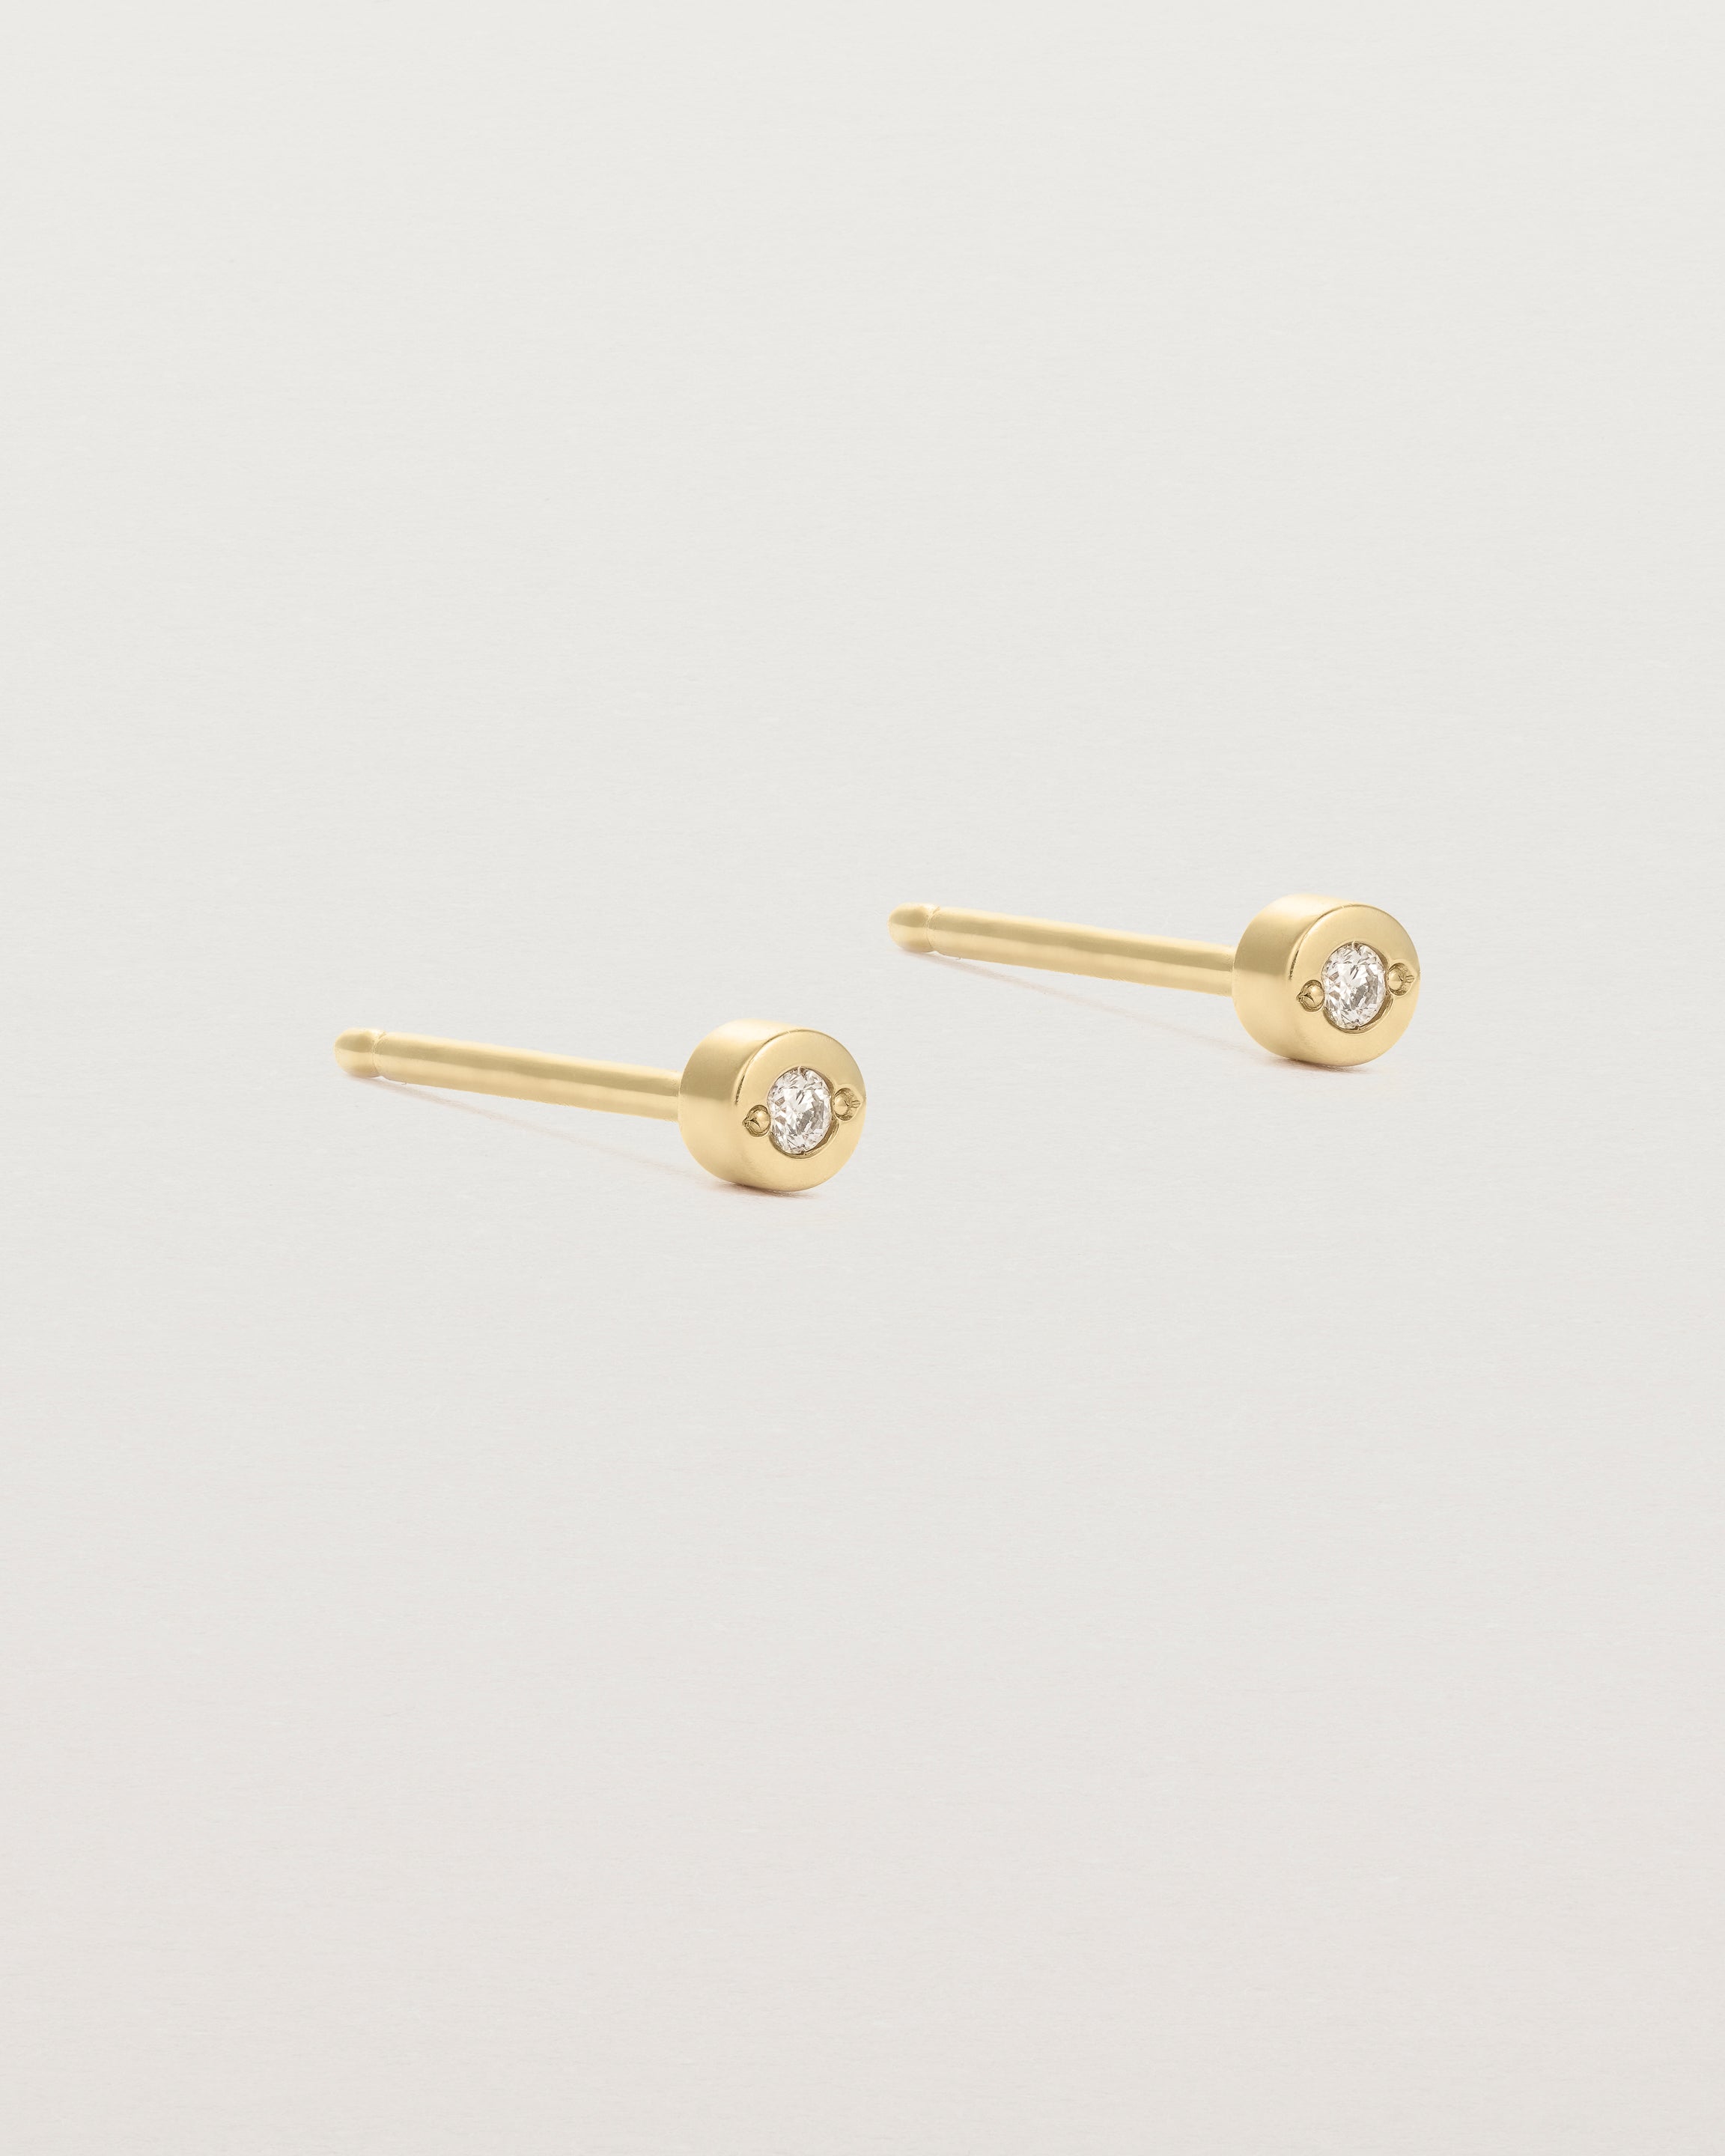 A small white circular yellow gold stud featuring a white diamond